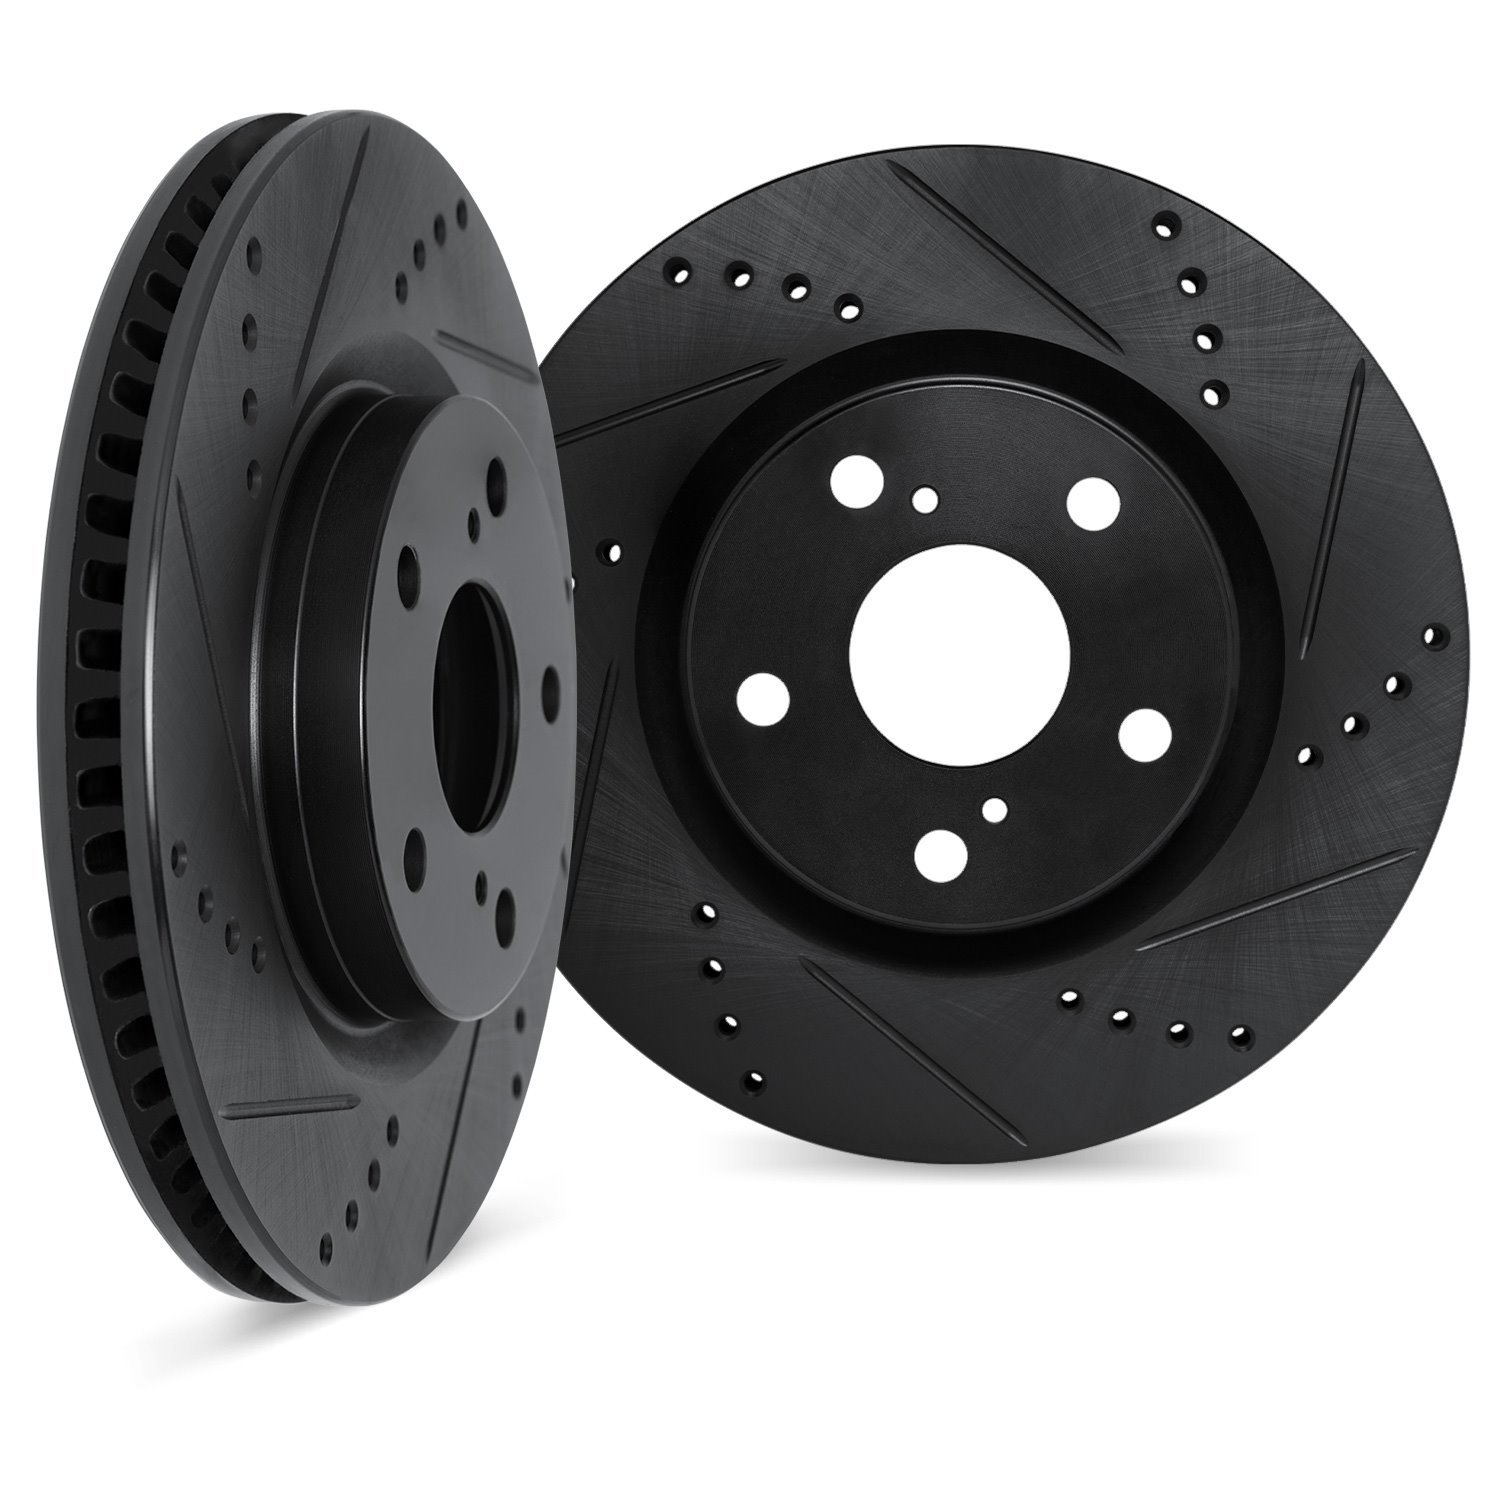 8002-76152 Drilled/Slotted Brake Rotors [Black], Fits Select Lexus/Toyota/Scion, Position: Rear